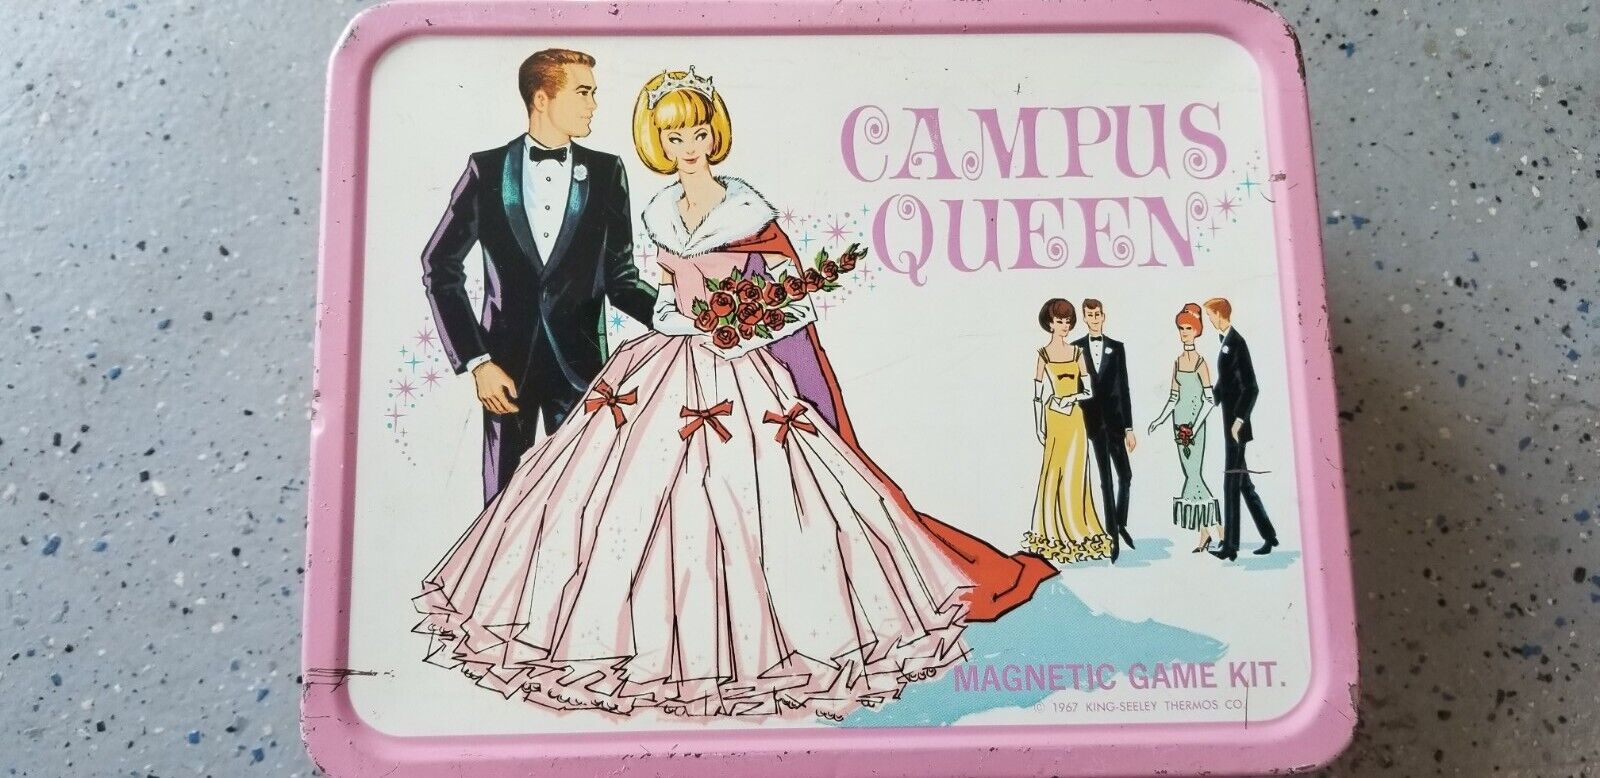 Campus Queen METAL LUNCH BOX King Seeley 1967 VGUC-LOVELY PATINA-FREE SHIPPING😀